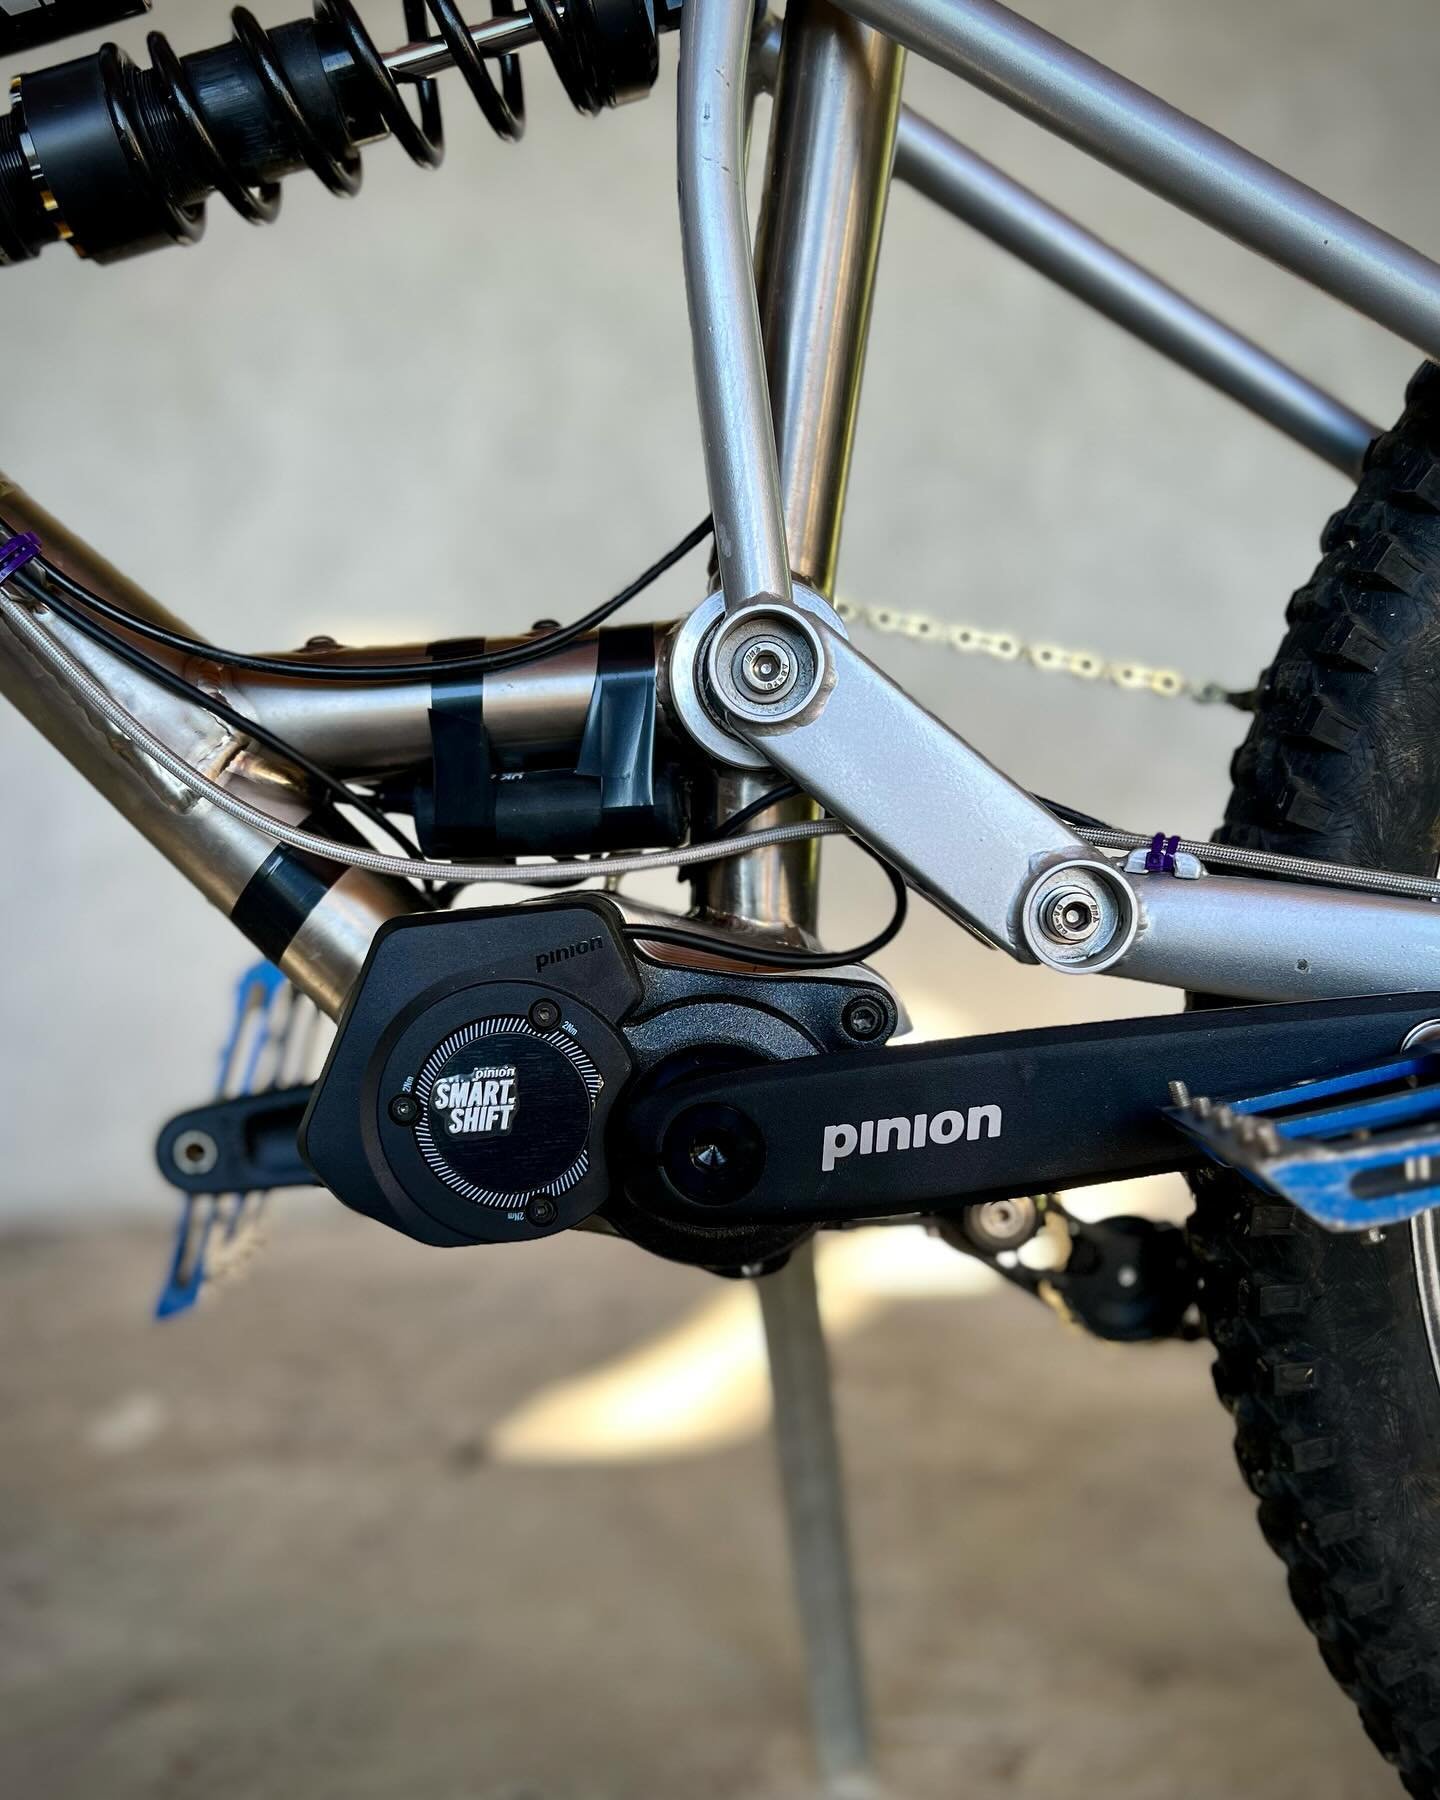 Hey look at me! I got a gearbox to stop sticks getting in my derailleur!

The stick&hellip;. 😂

&mdash;

My AstonMTB Mission:

I&rsquo;m here to give the most independent bike reviews online. Starting with stock equipment then trying to get the abso